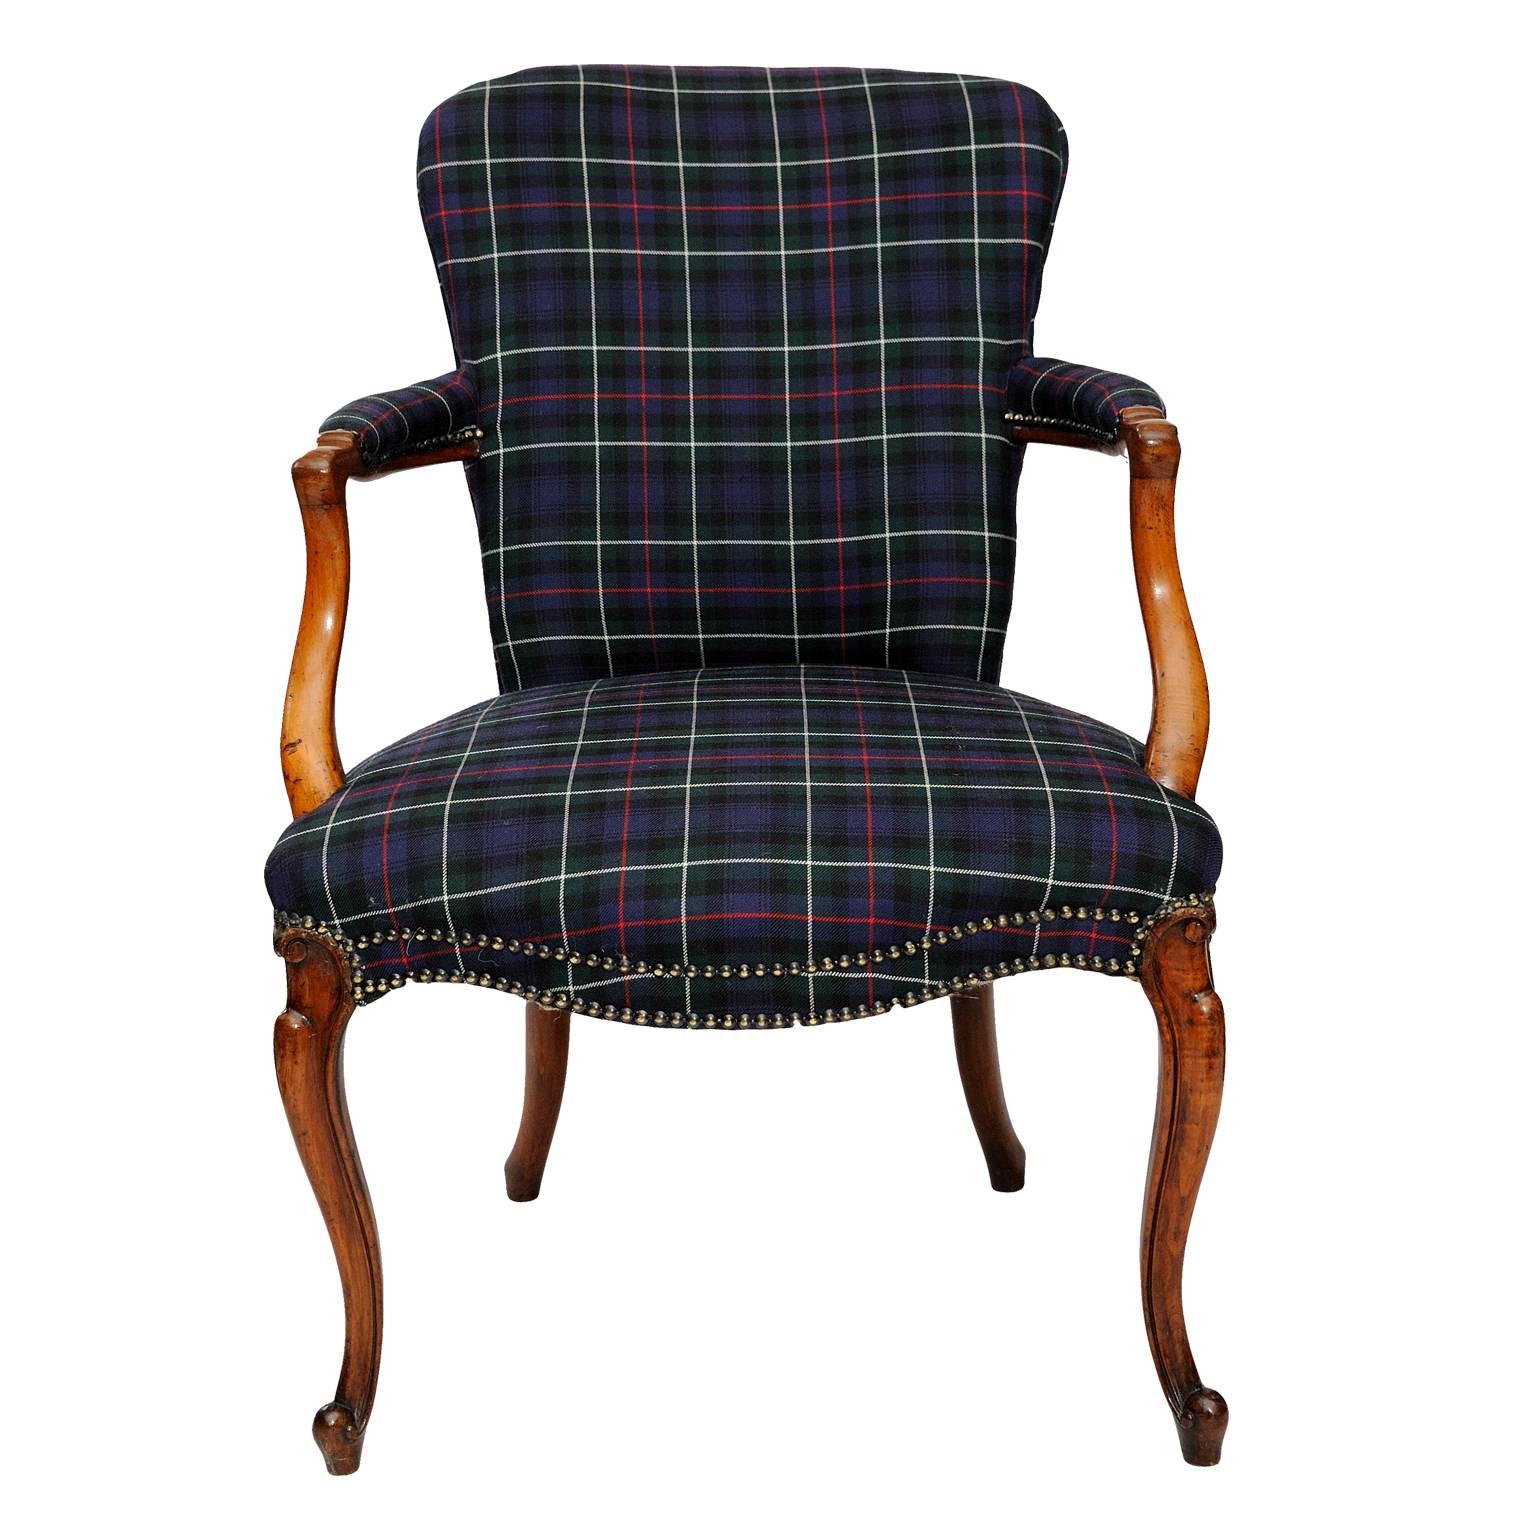 This is a very smart English mid 18th Century George III period fruitwood Open Armchair, upholstered in stylish and very complimentary tartan fabric, circa 1760.